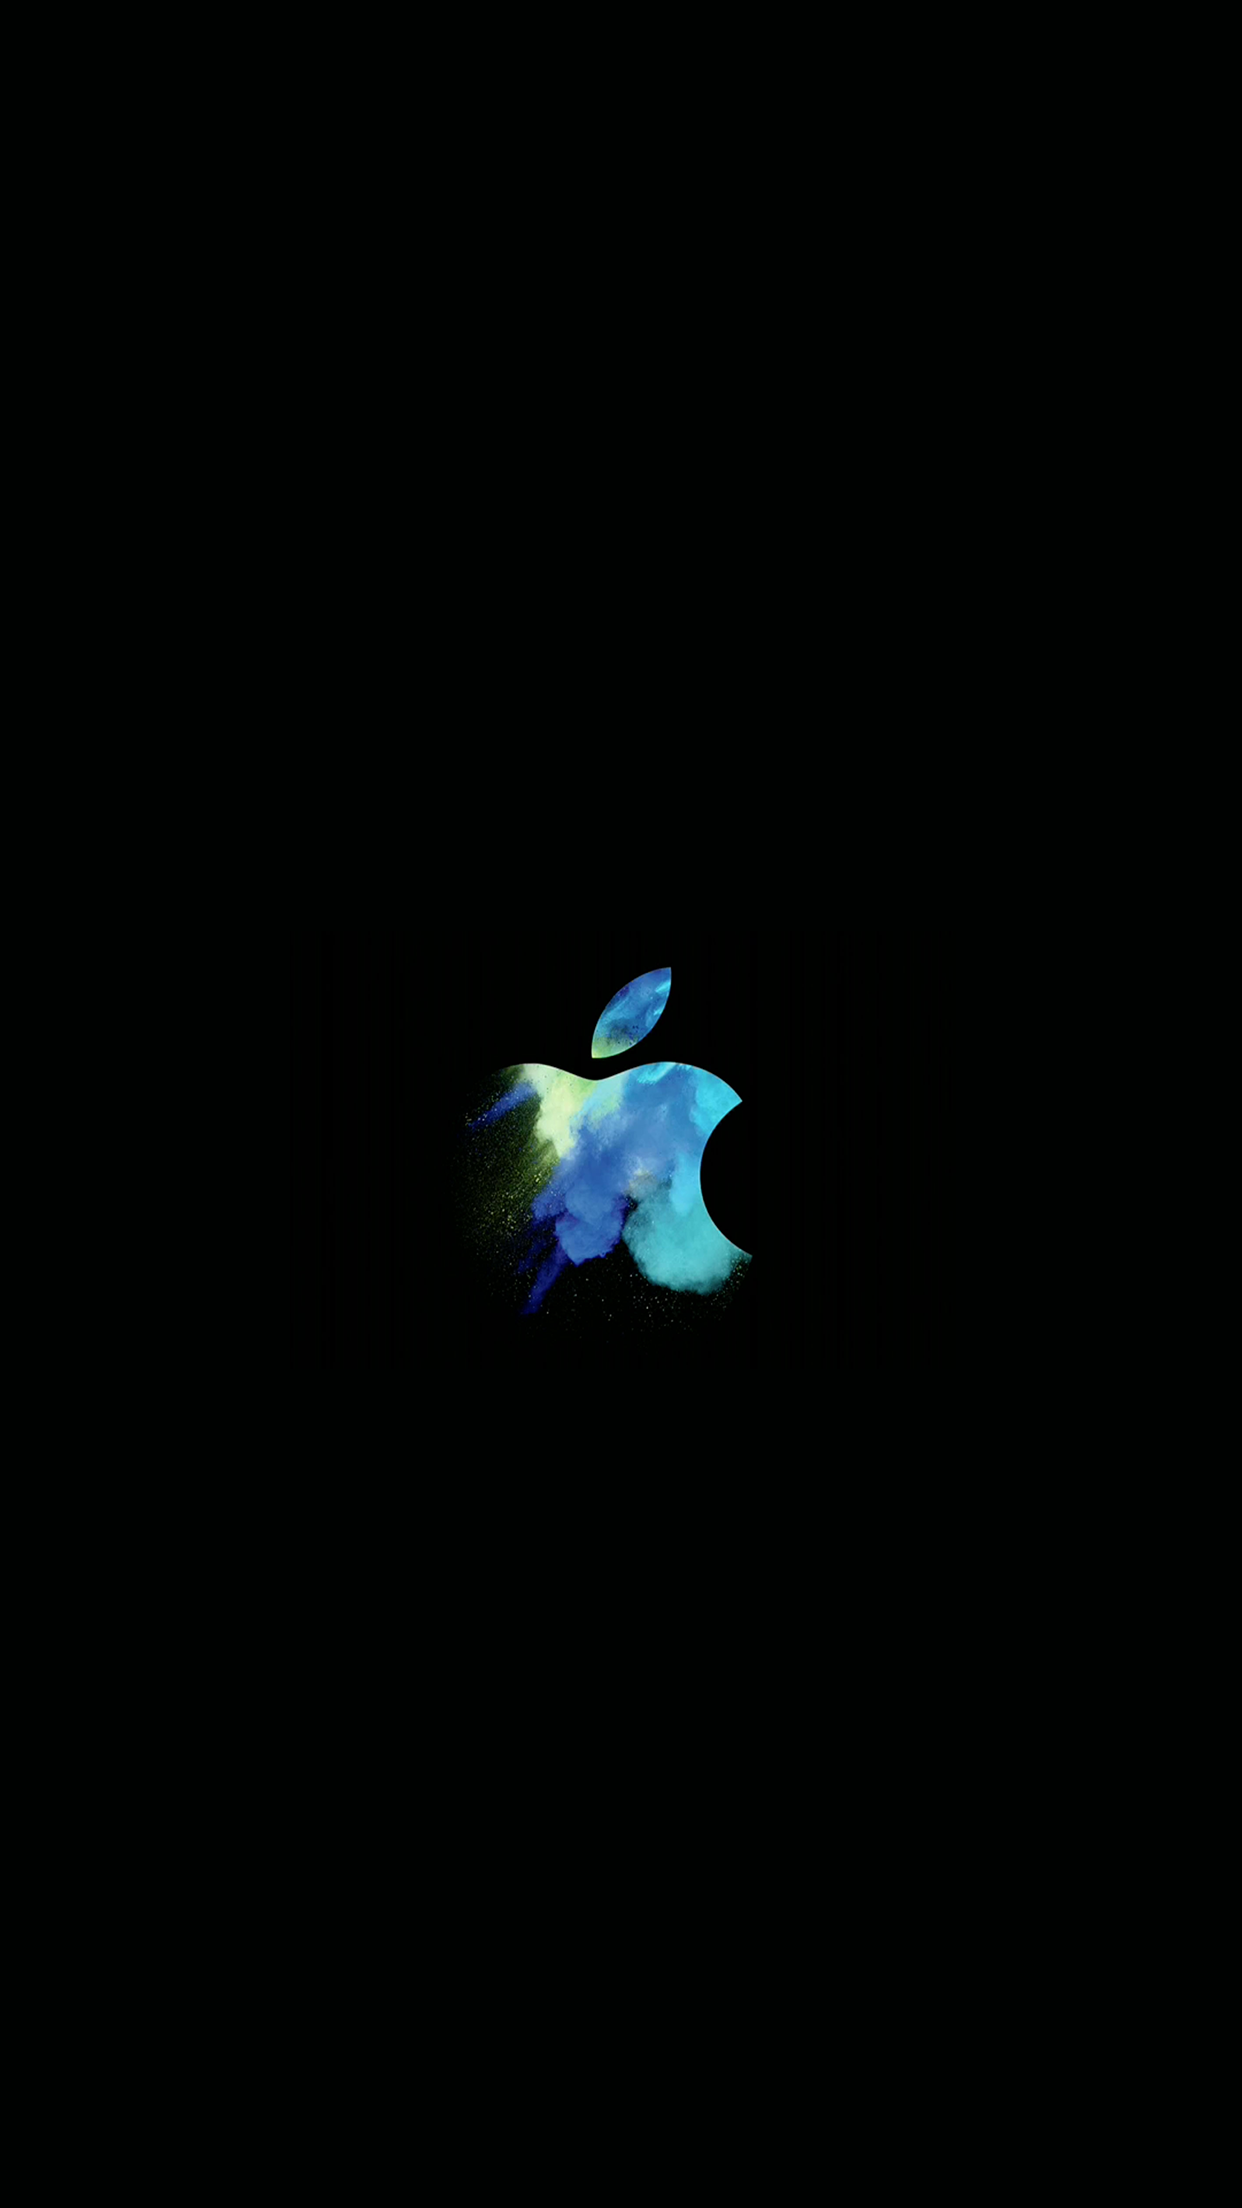 Macbook Pro With Touch Bar Event Wallpaper